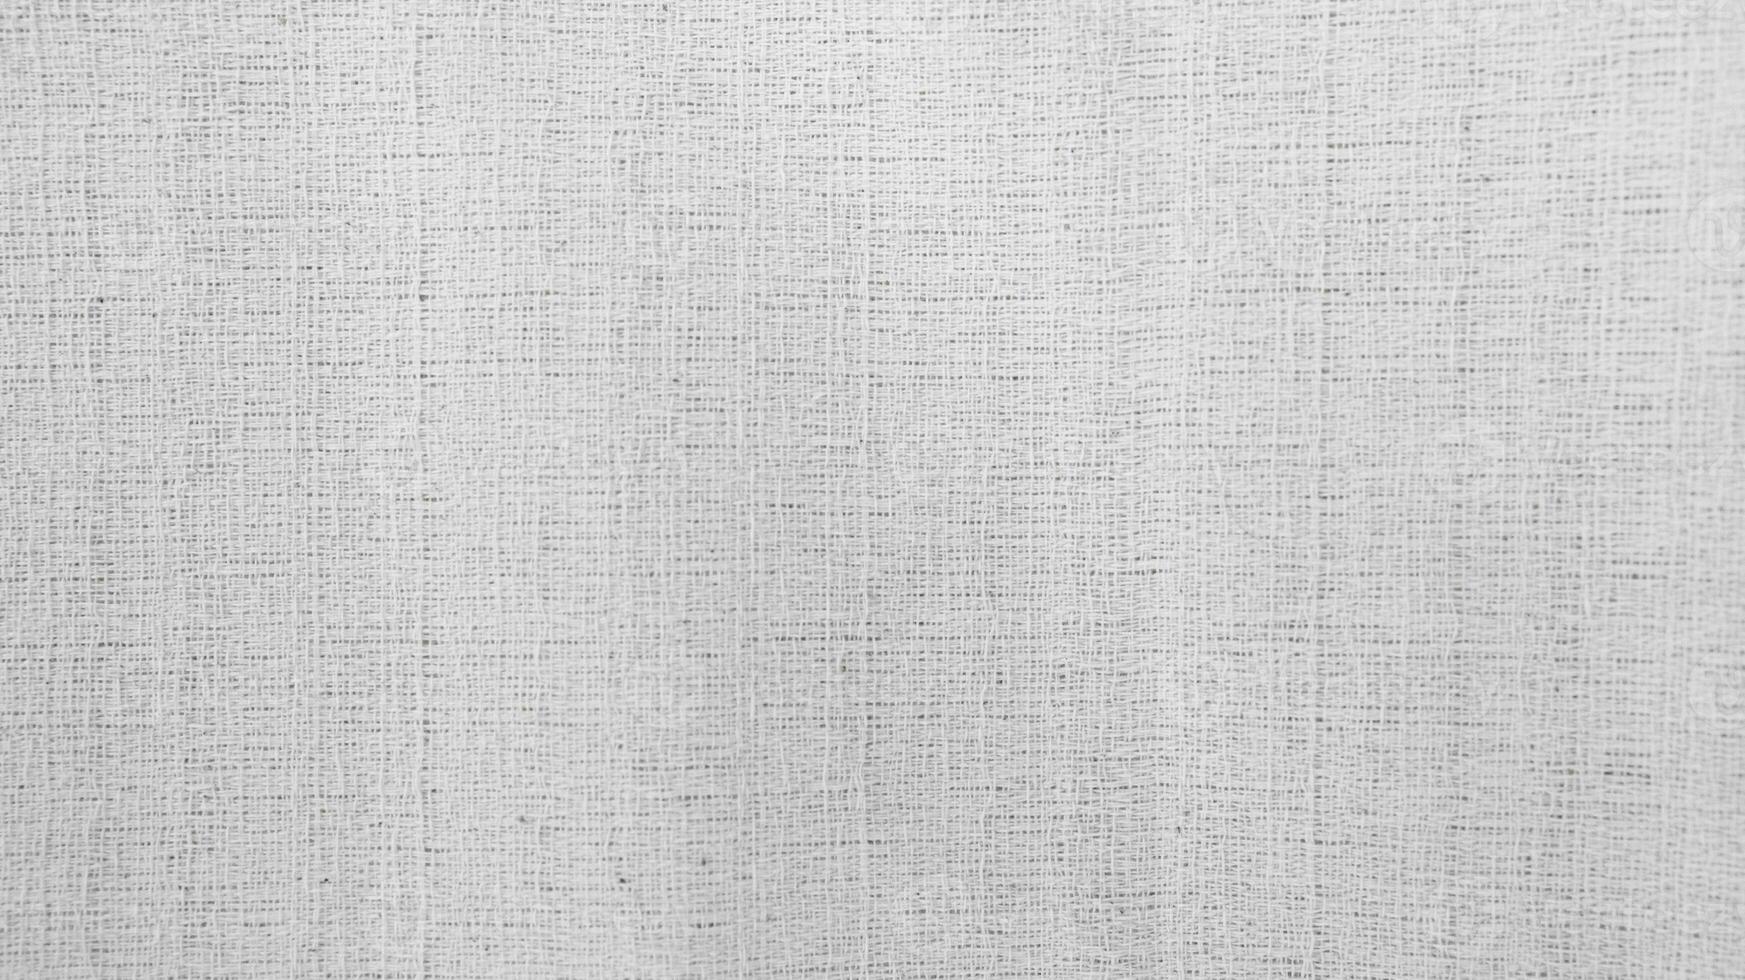 Organic Fabric cotton backdrop White linen canvas crumpled natural cotton fabric Natural handmade linen top view background  organic Eco textiles White Fabric linen texture photo